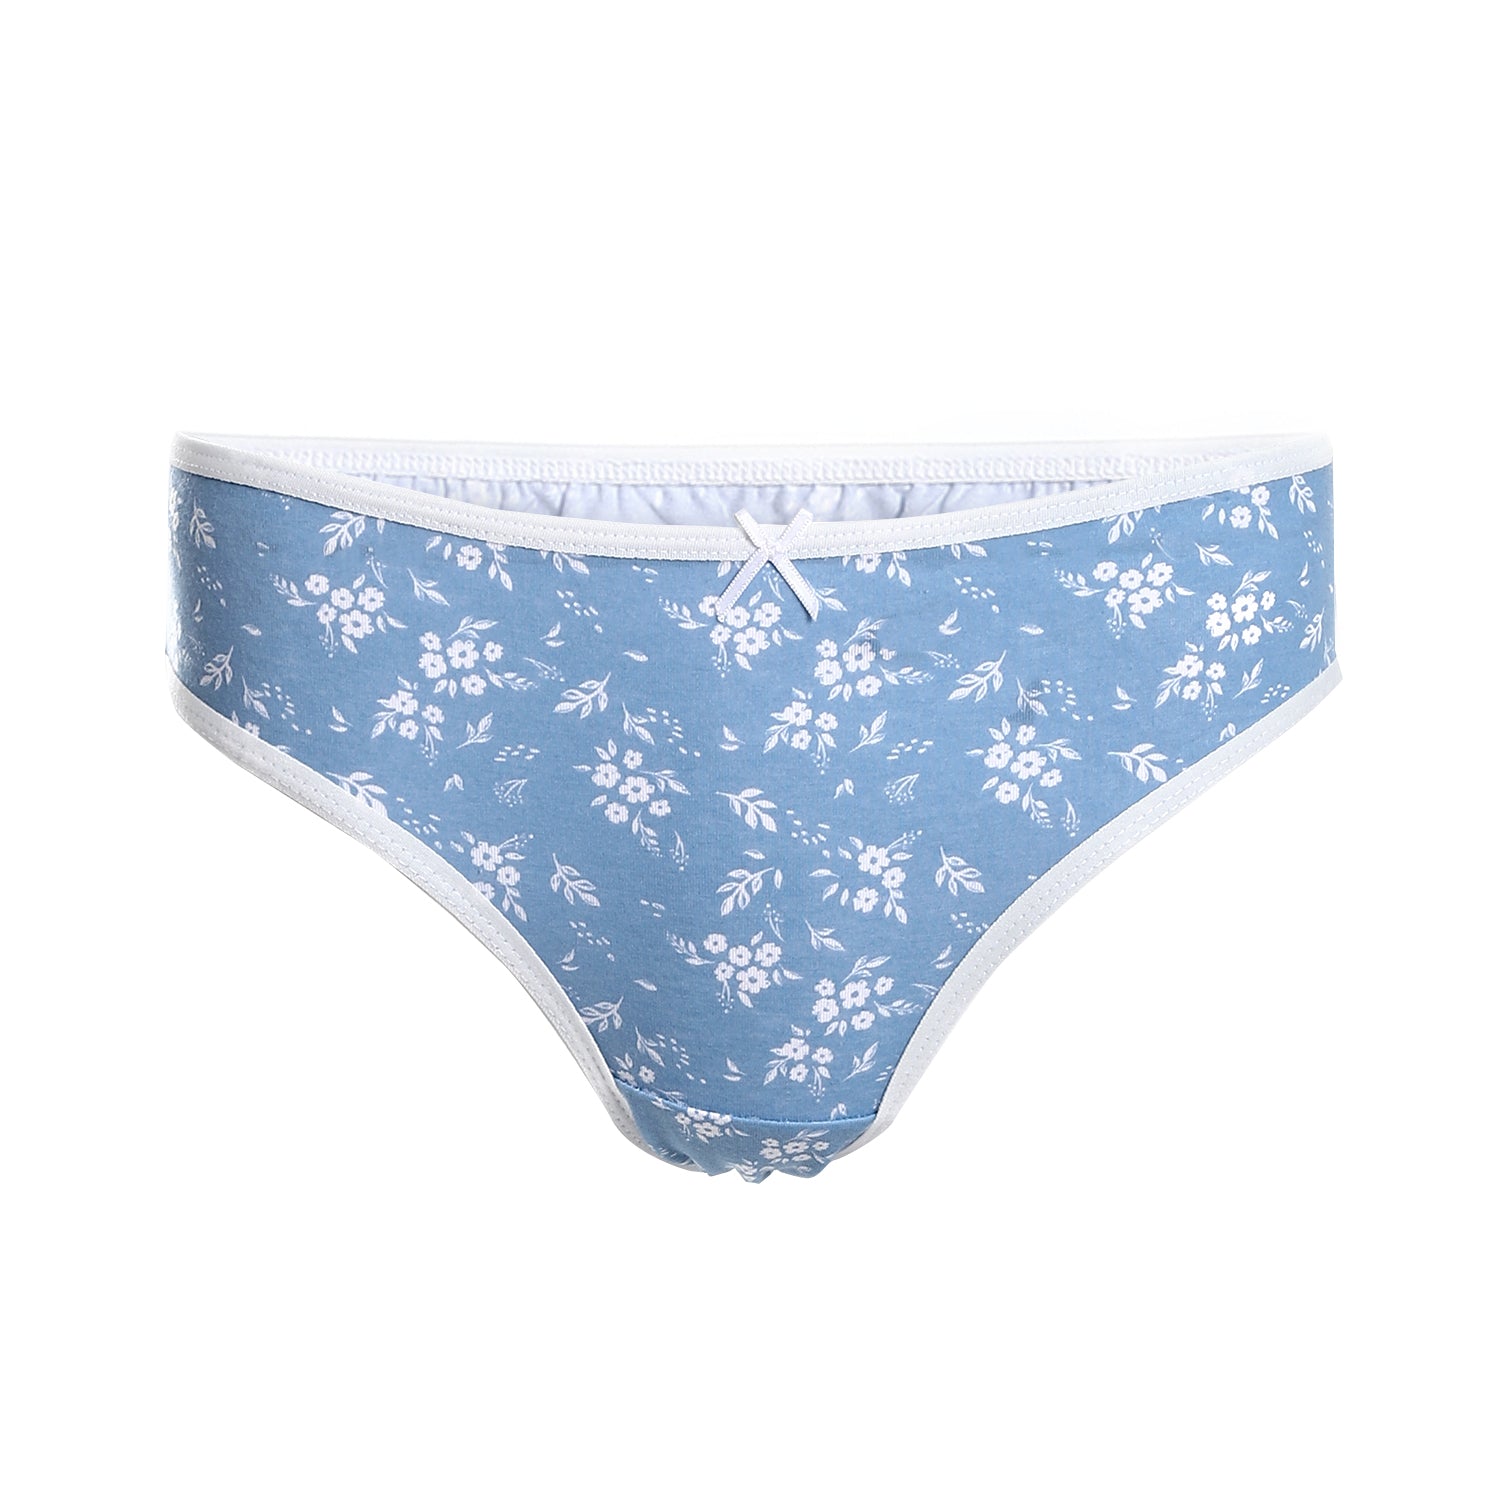 Women's set printed strap-top and panty - Blue